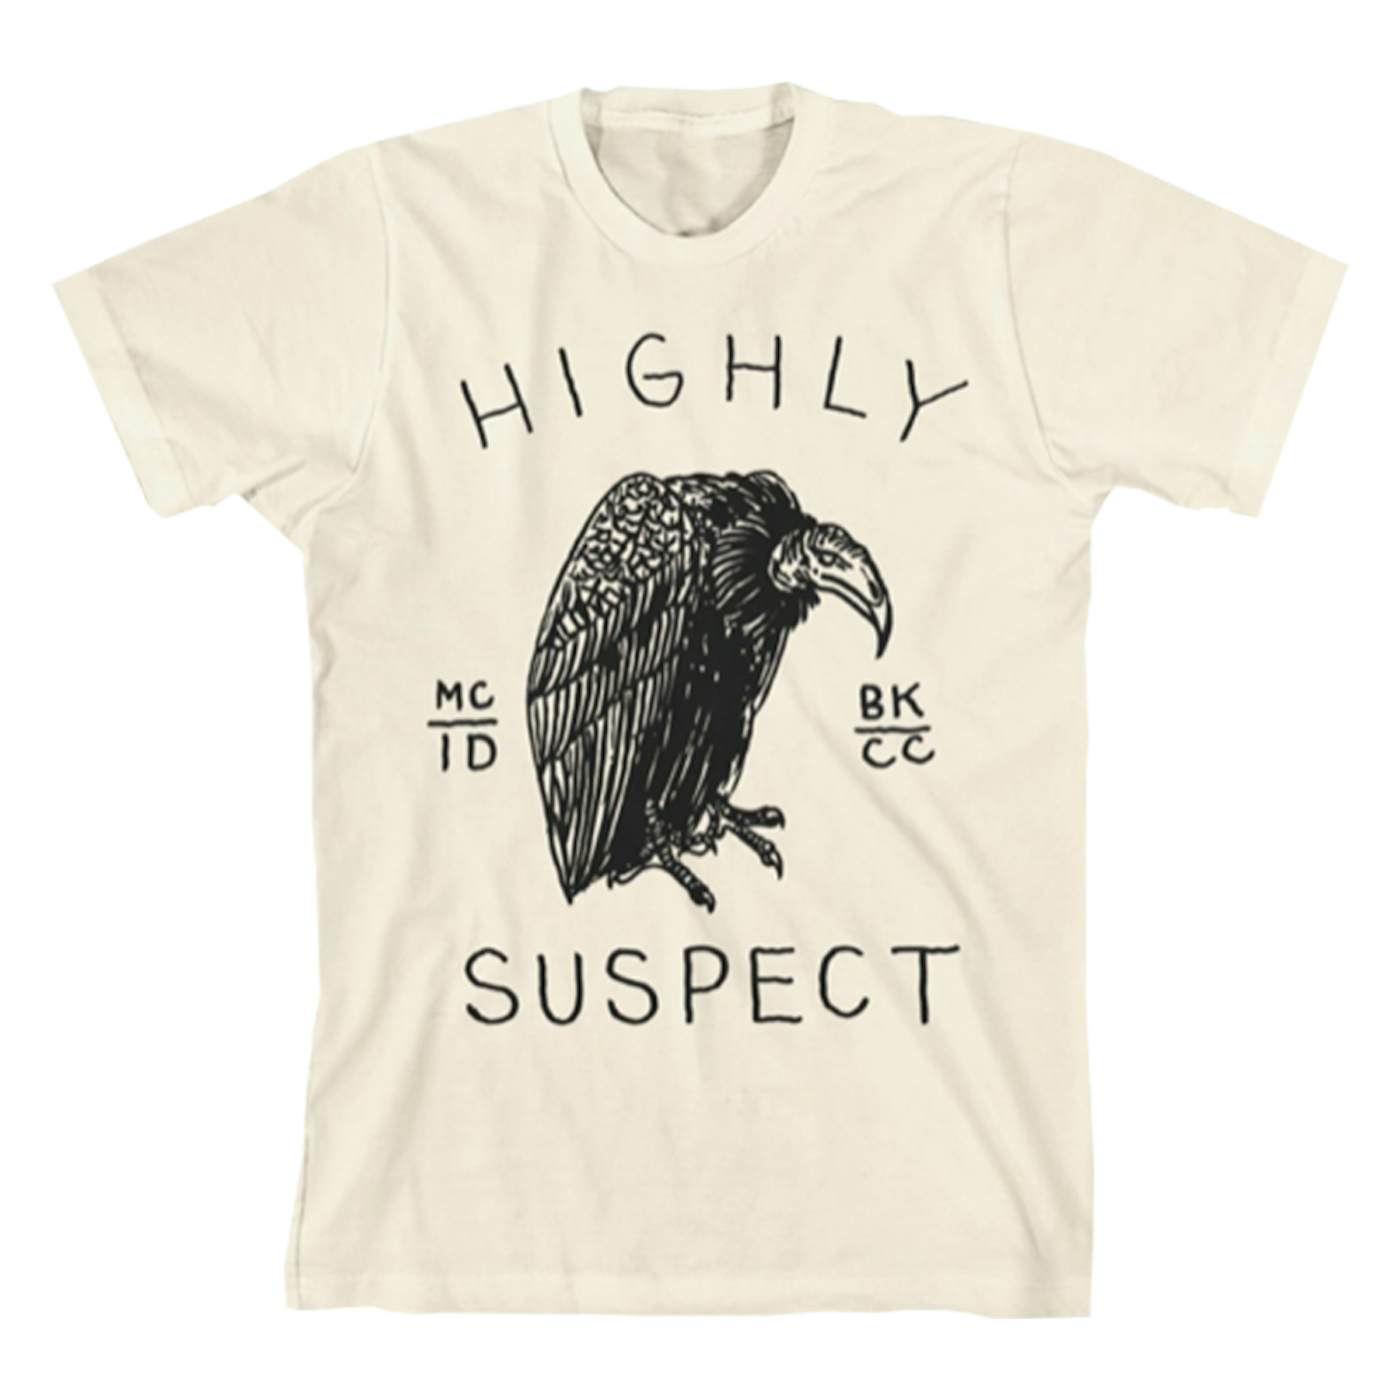 Highly Suspect - Tee